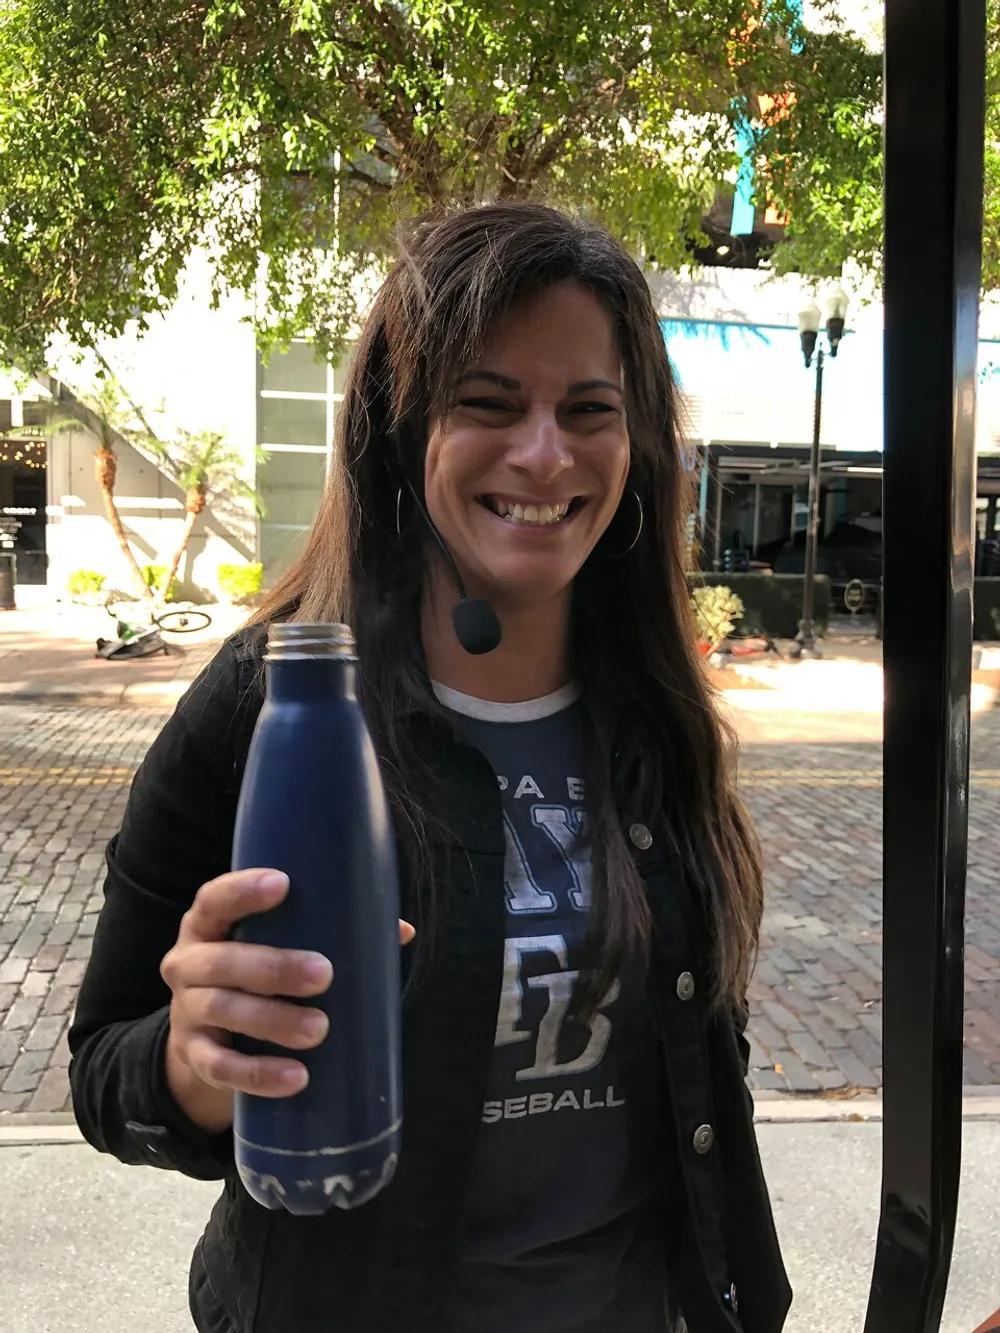 A smiling woman with a headset is holding a blue water bottle outdoors